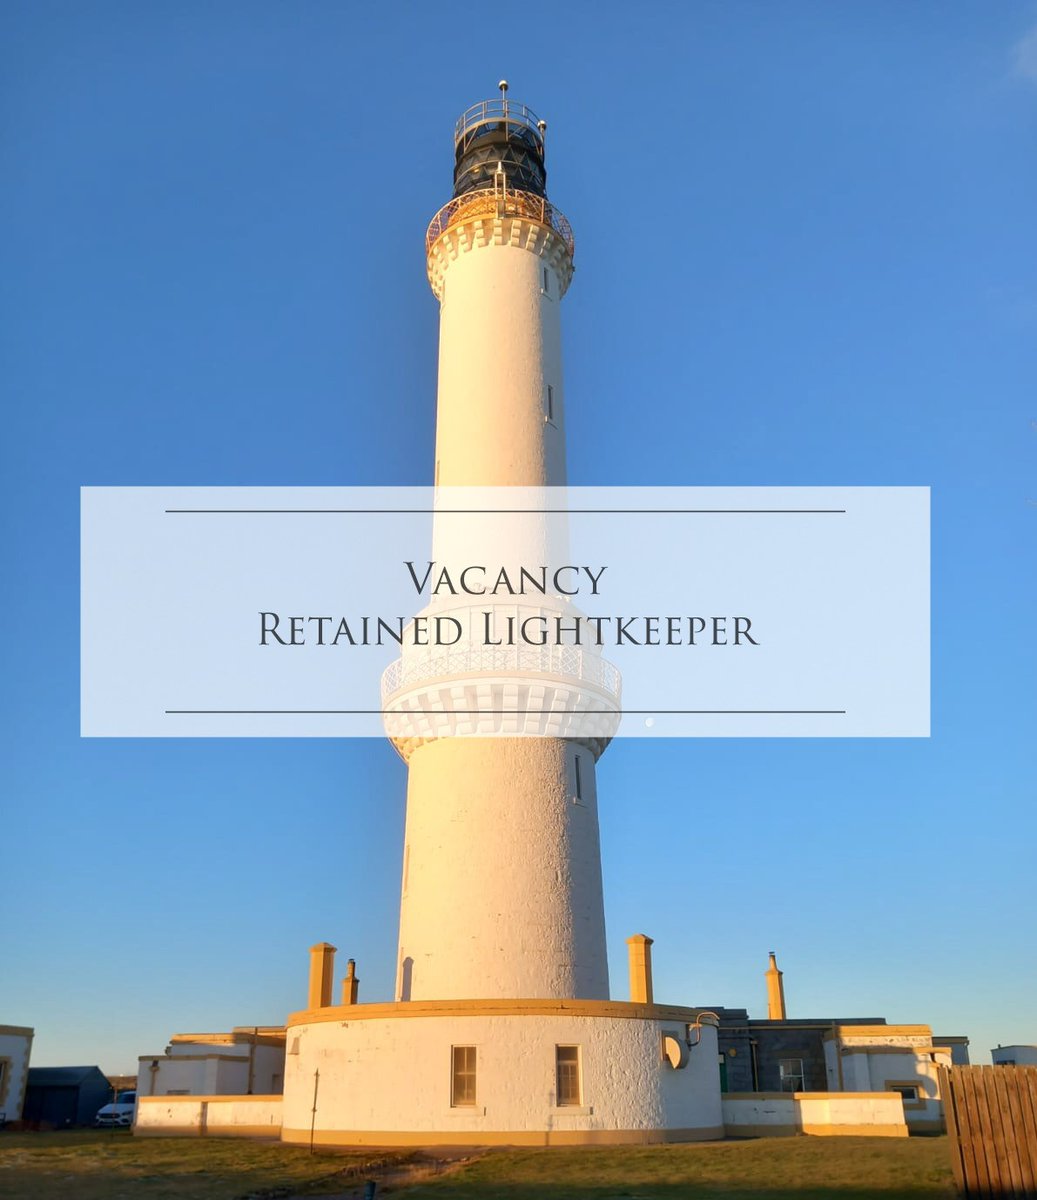 Due to retirement (our last RLK was in the job for 40 years!) we’re recruiting for a P/T Retained Lightkeeper to maintain Kinnaird Head, Buchan Ness & Girdle Ness Lighthouses.  Apply by 15 March bit.ly/3ZwkFxJ

#vacancy #LighthouseKeeper #aberdeenshirejobs #lighthouses